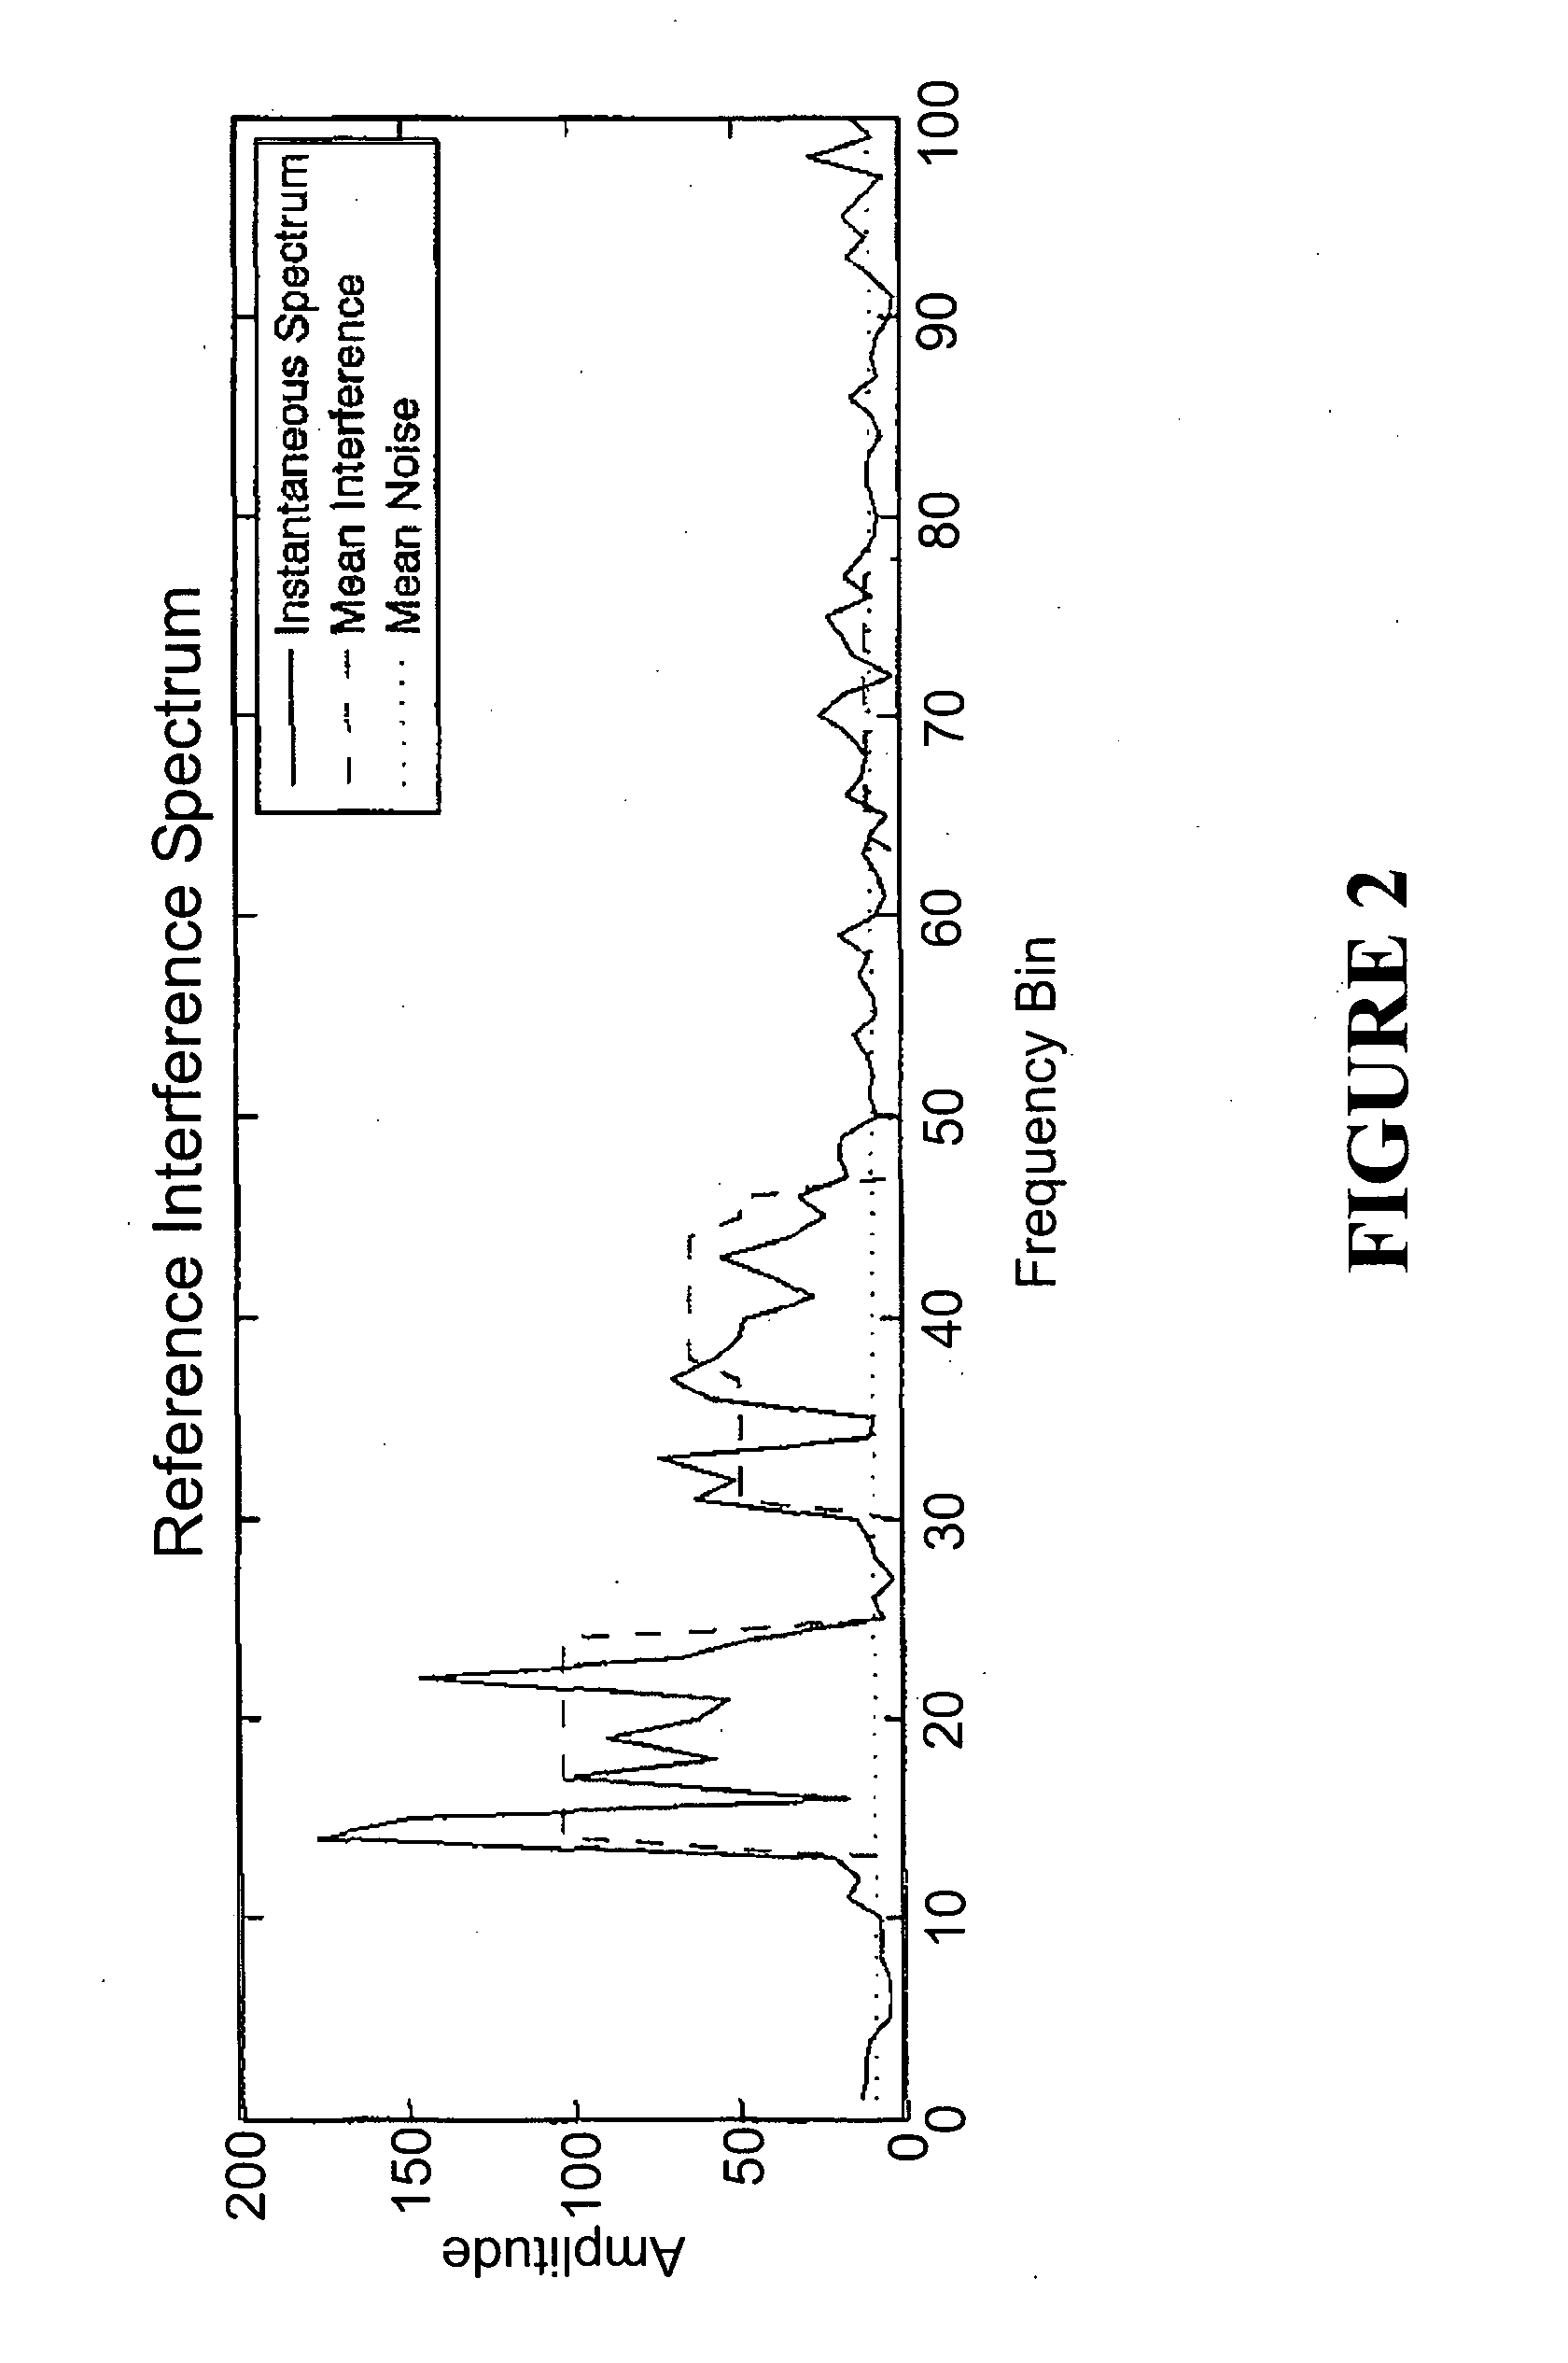 Detection of Wideband Interference